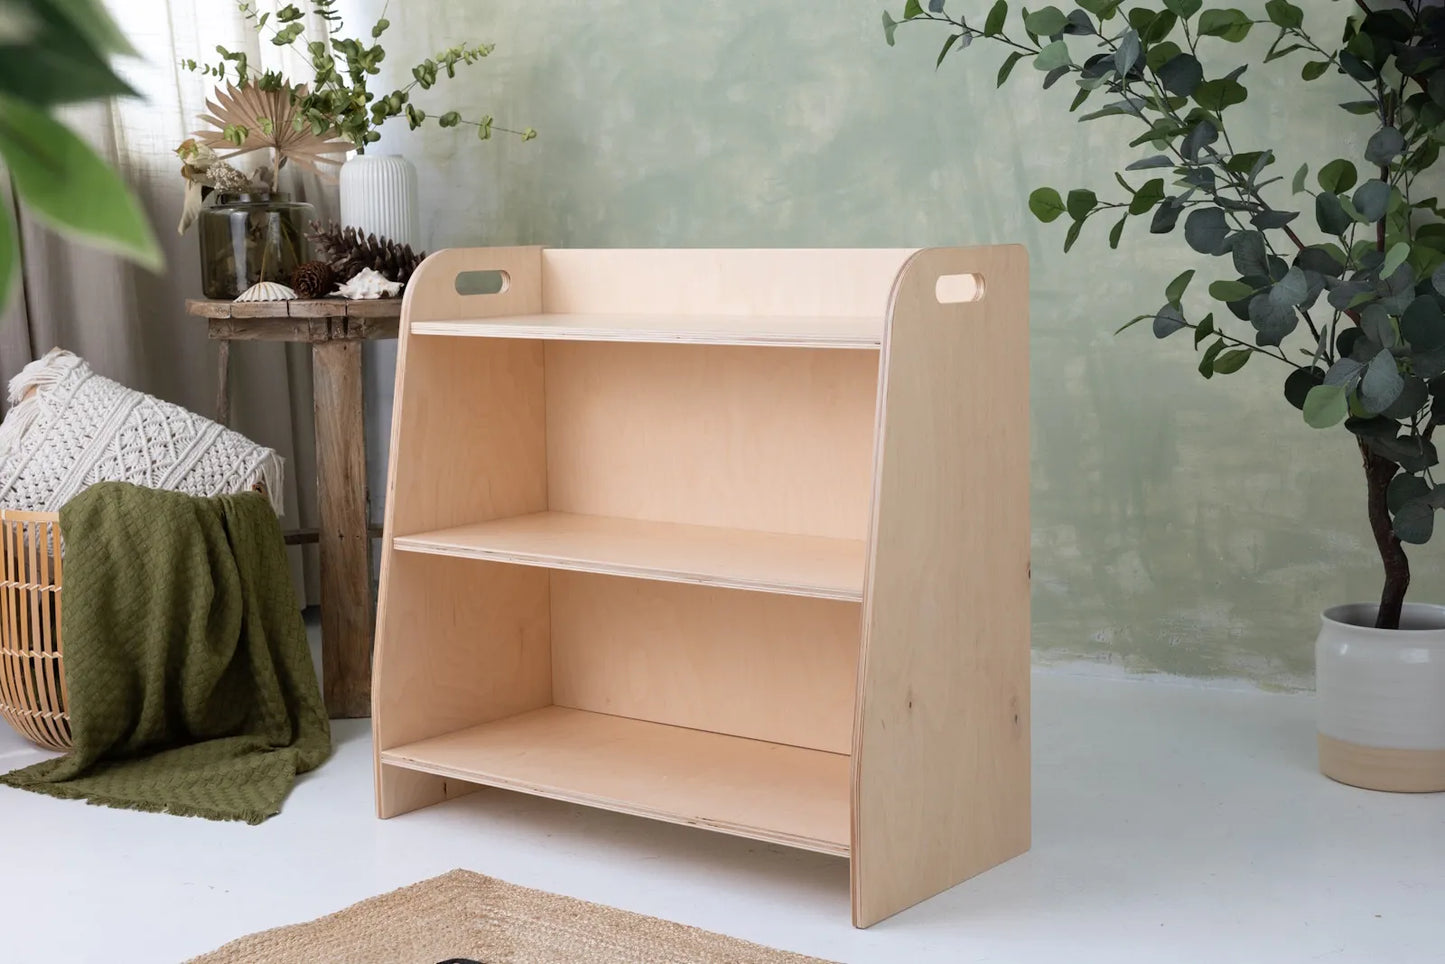 Enhance Playtime Handcrafted Toy Shelf for Kids Rooms